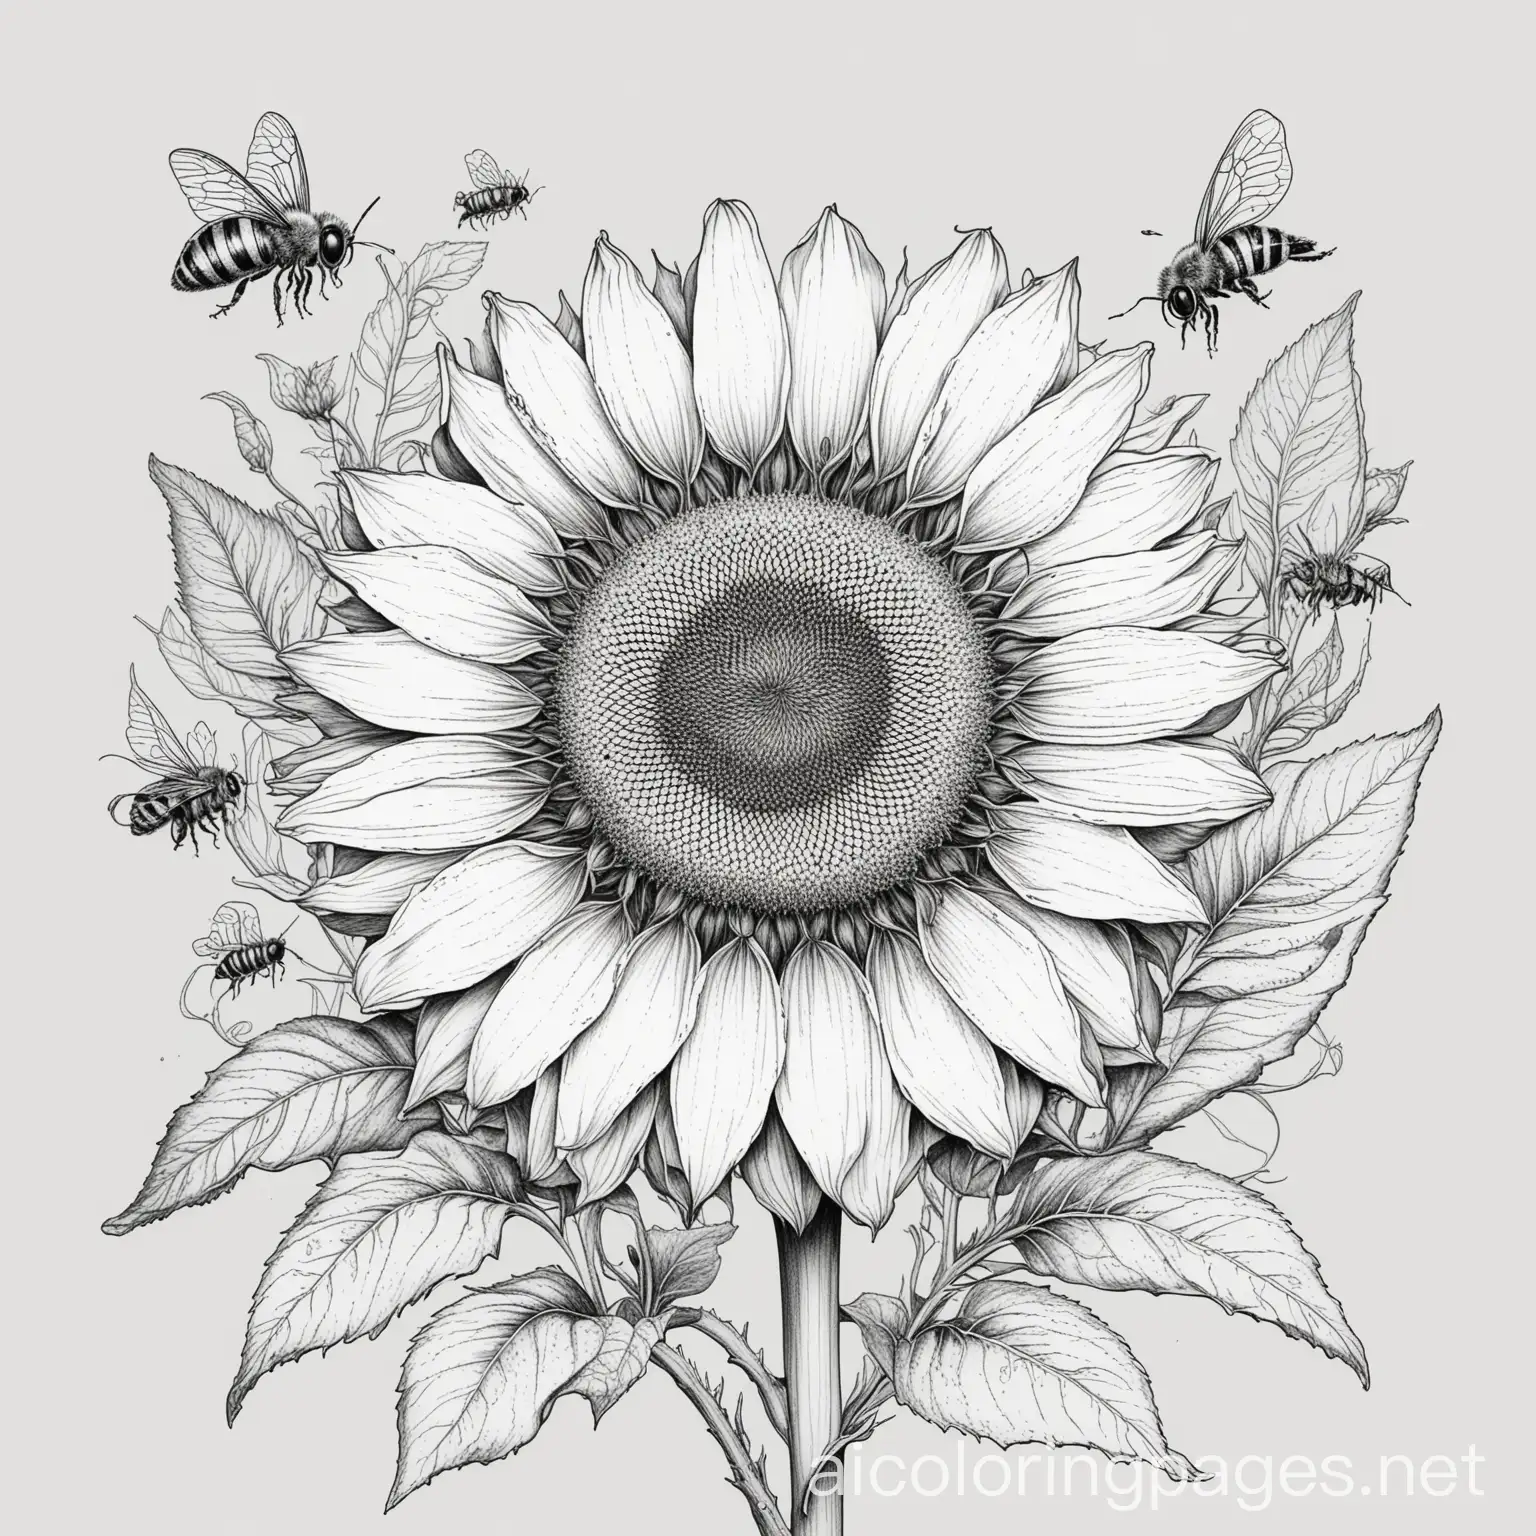 sunflower and bees, Coloring Page, black and white, line art, white background, Simplicity, Ample White Space. The background of the coloring page is plain white to make it easy for young children to color within the lines. The outlines of all the subjects are easy to distinguish, making it simple for kids to color without too much difficulty